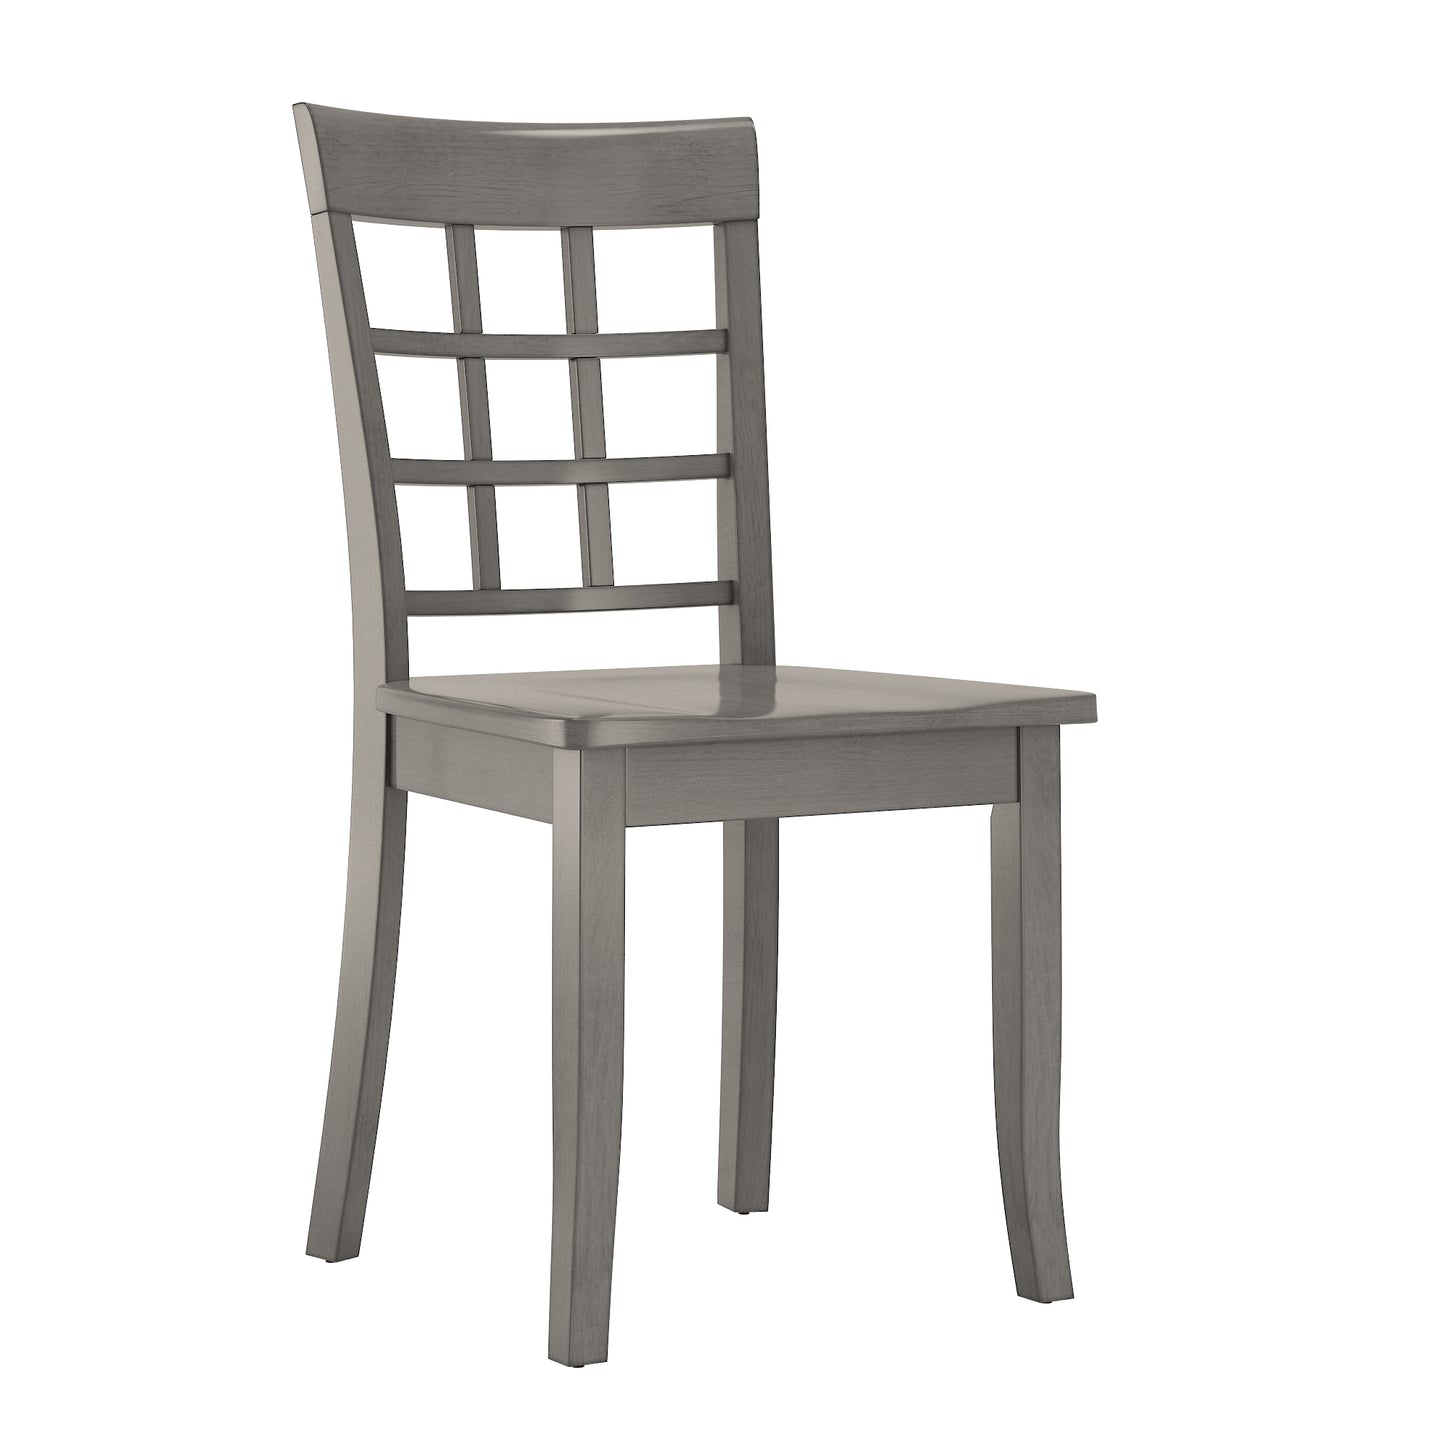 Window Back Wood Dining Chairs (Set of 2) - Antique Grey Finish